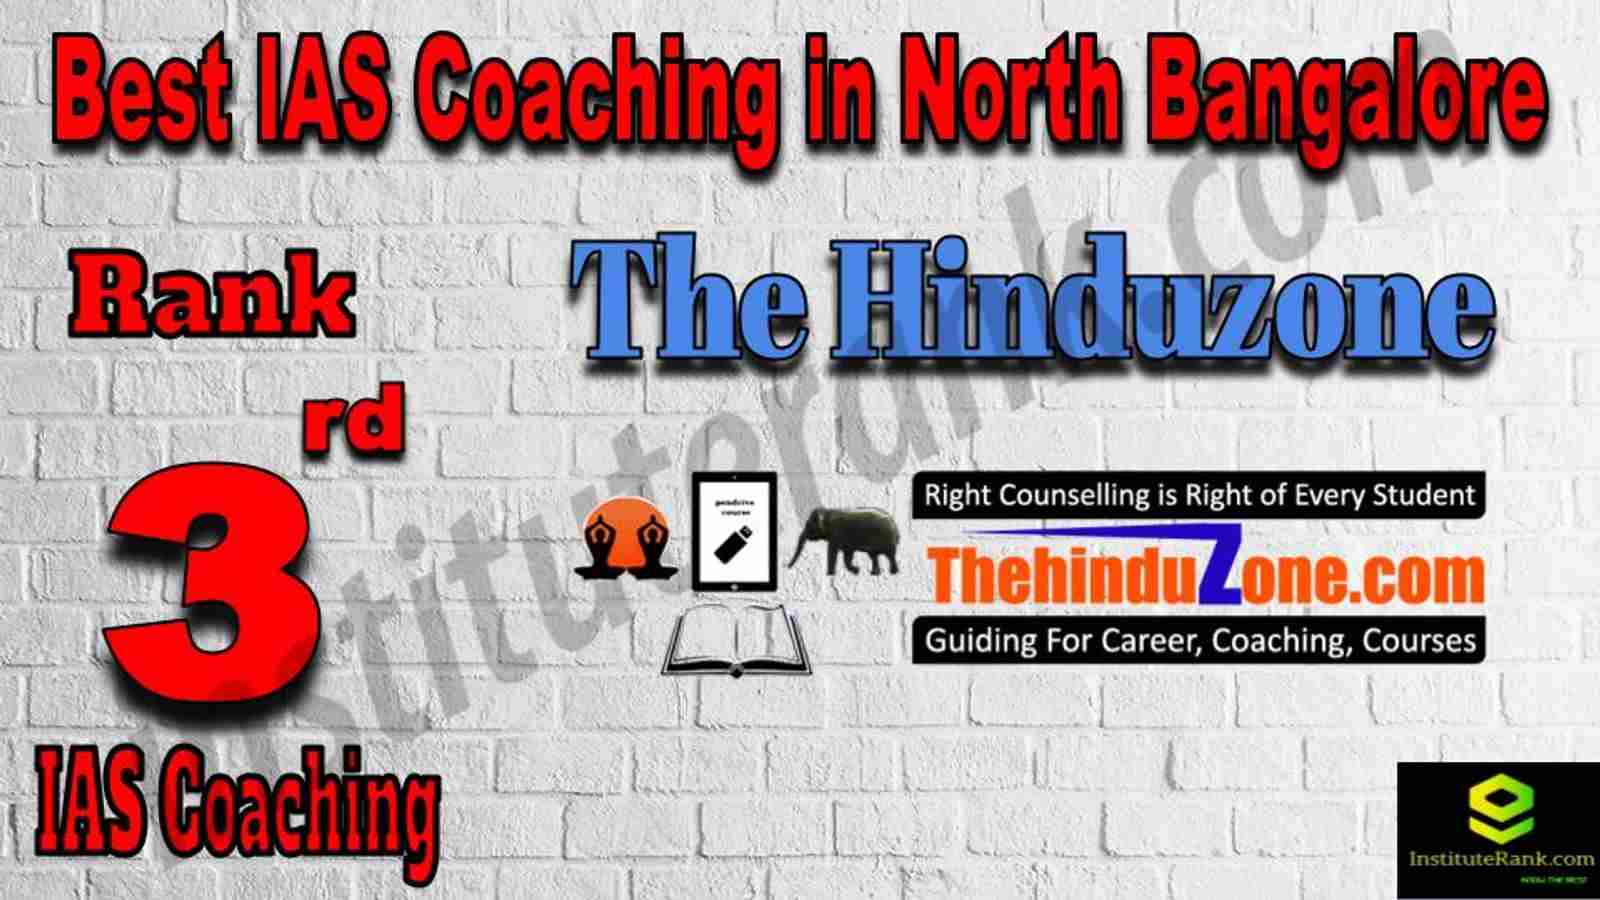 3rd Best IAS Coaching in North Bangalore